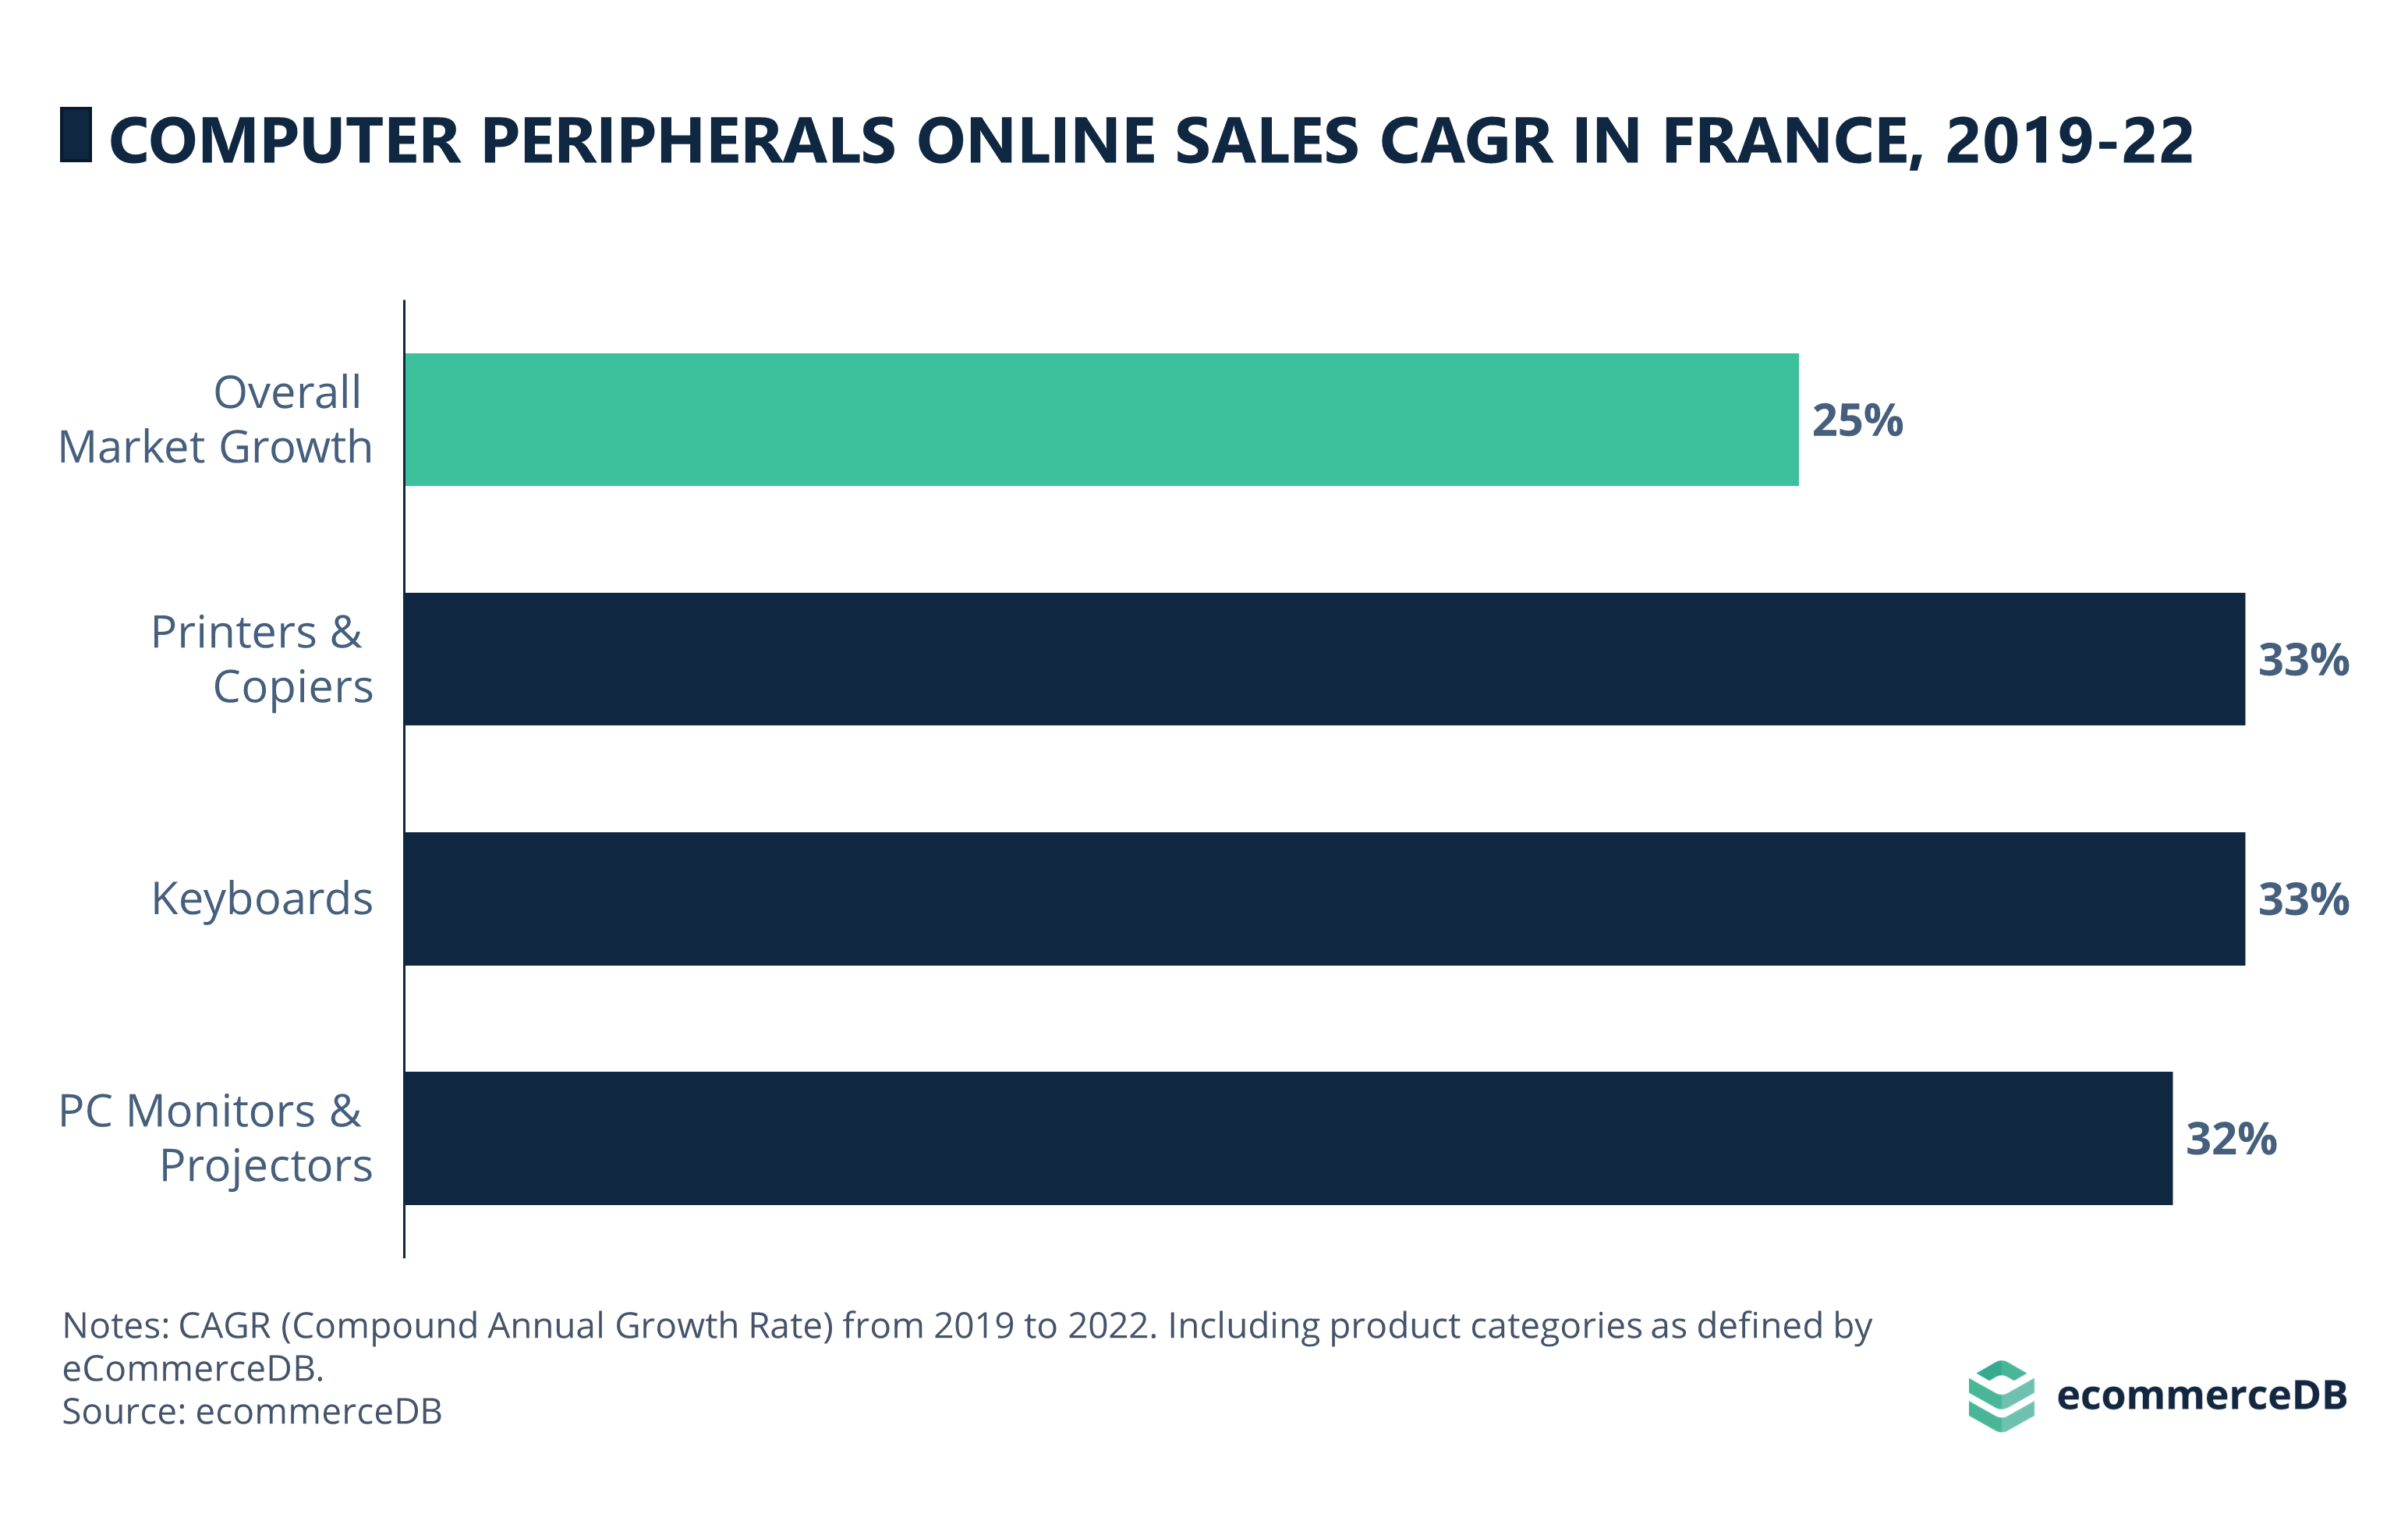 Computer Peripherals Online Sales CAGR (19-22) in France